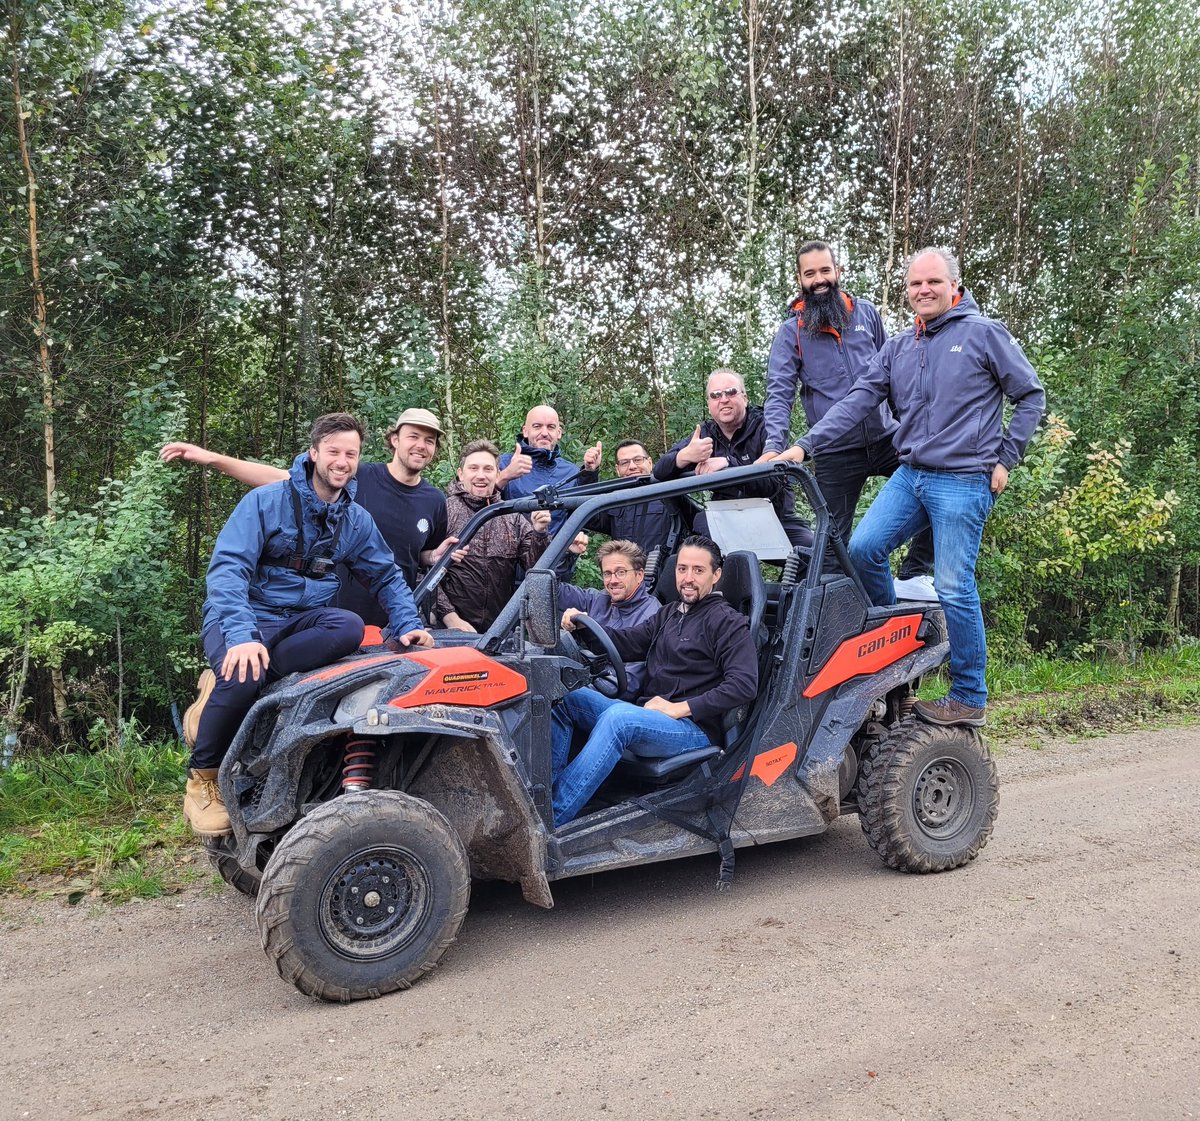 @ITQ Buggy driving with colleagues as part of the #ITQonnect days!
#ITQLife #ITQare #ITQ